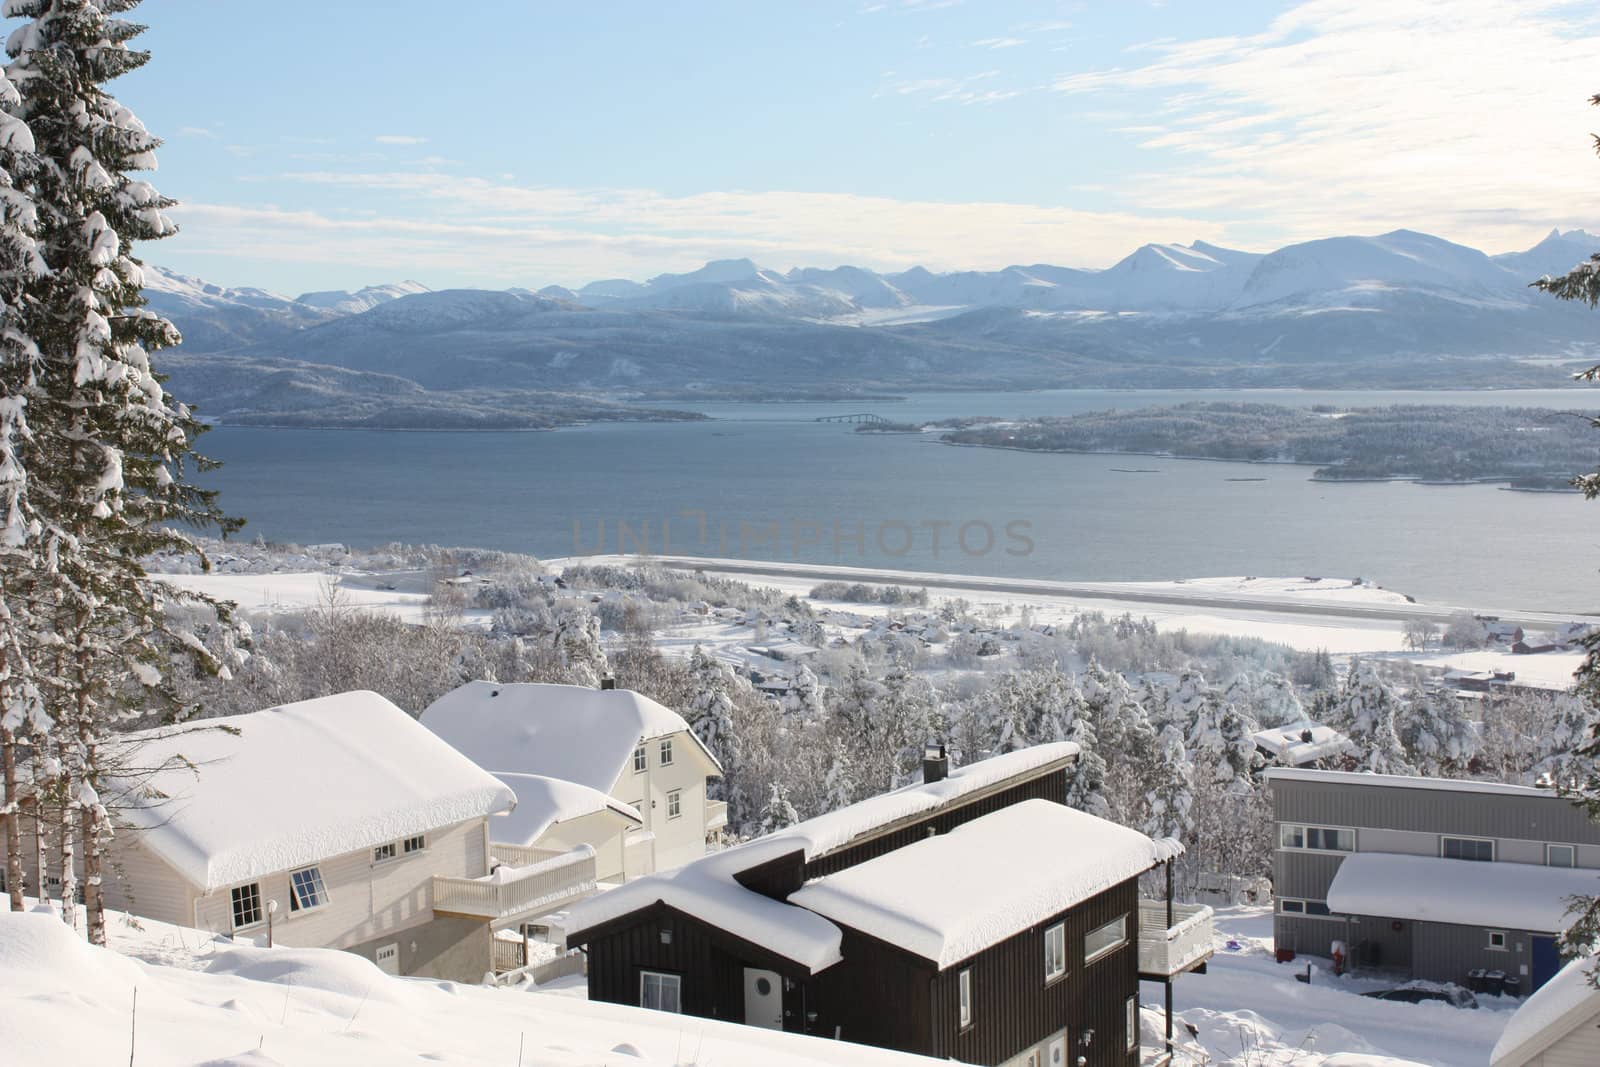 Neighbourhood of modern houses with fantastic view over fjord, islands, and mountains, in a snow clad winter landscape